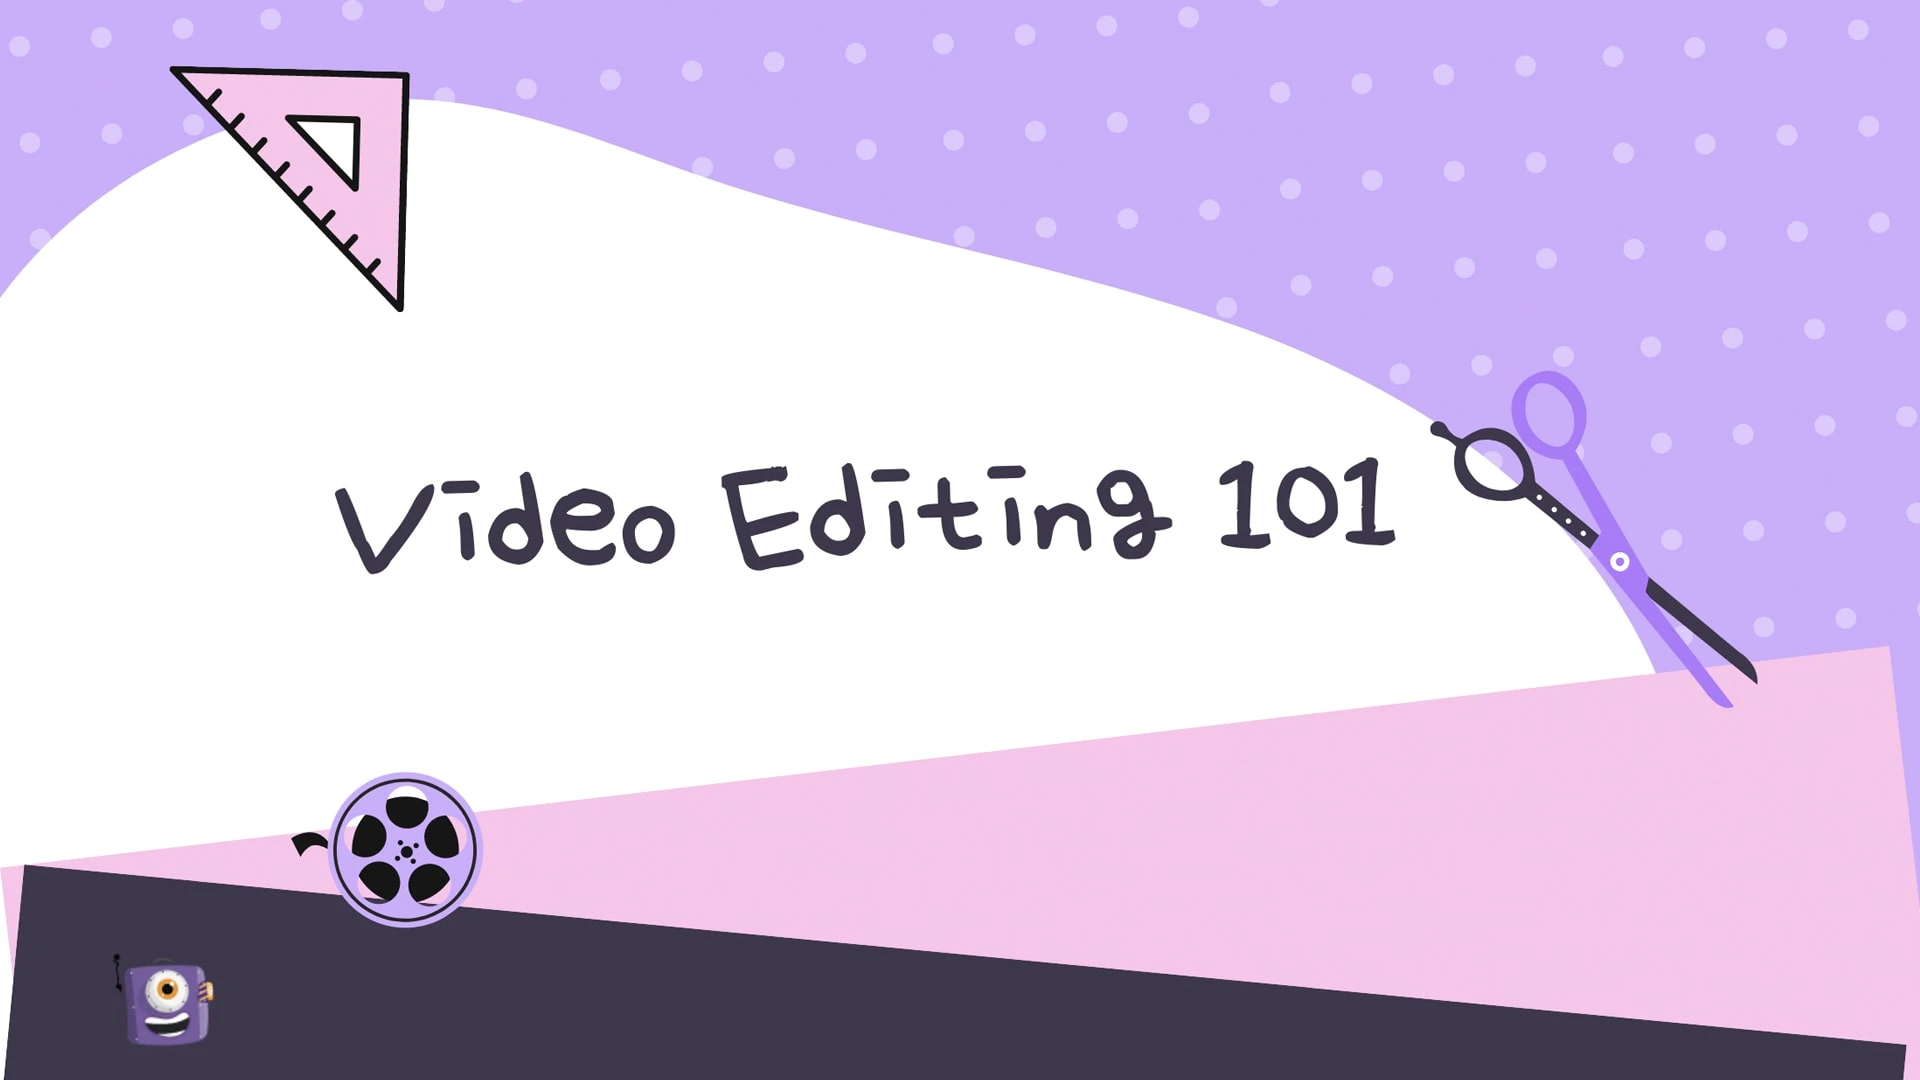 Video editing guide blog banner